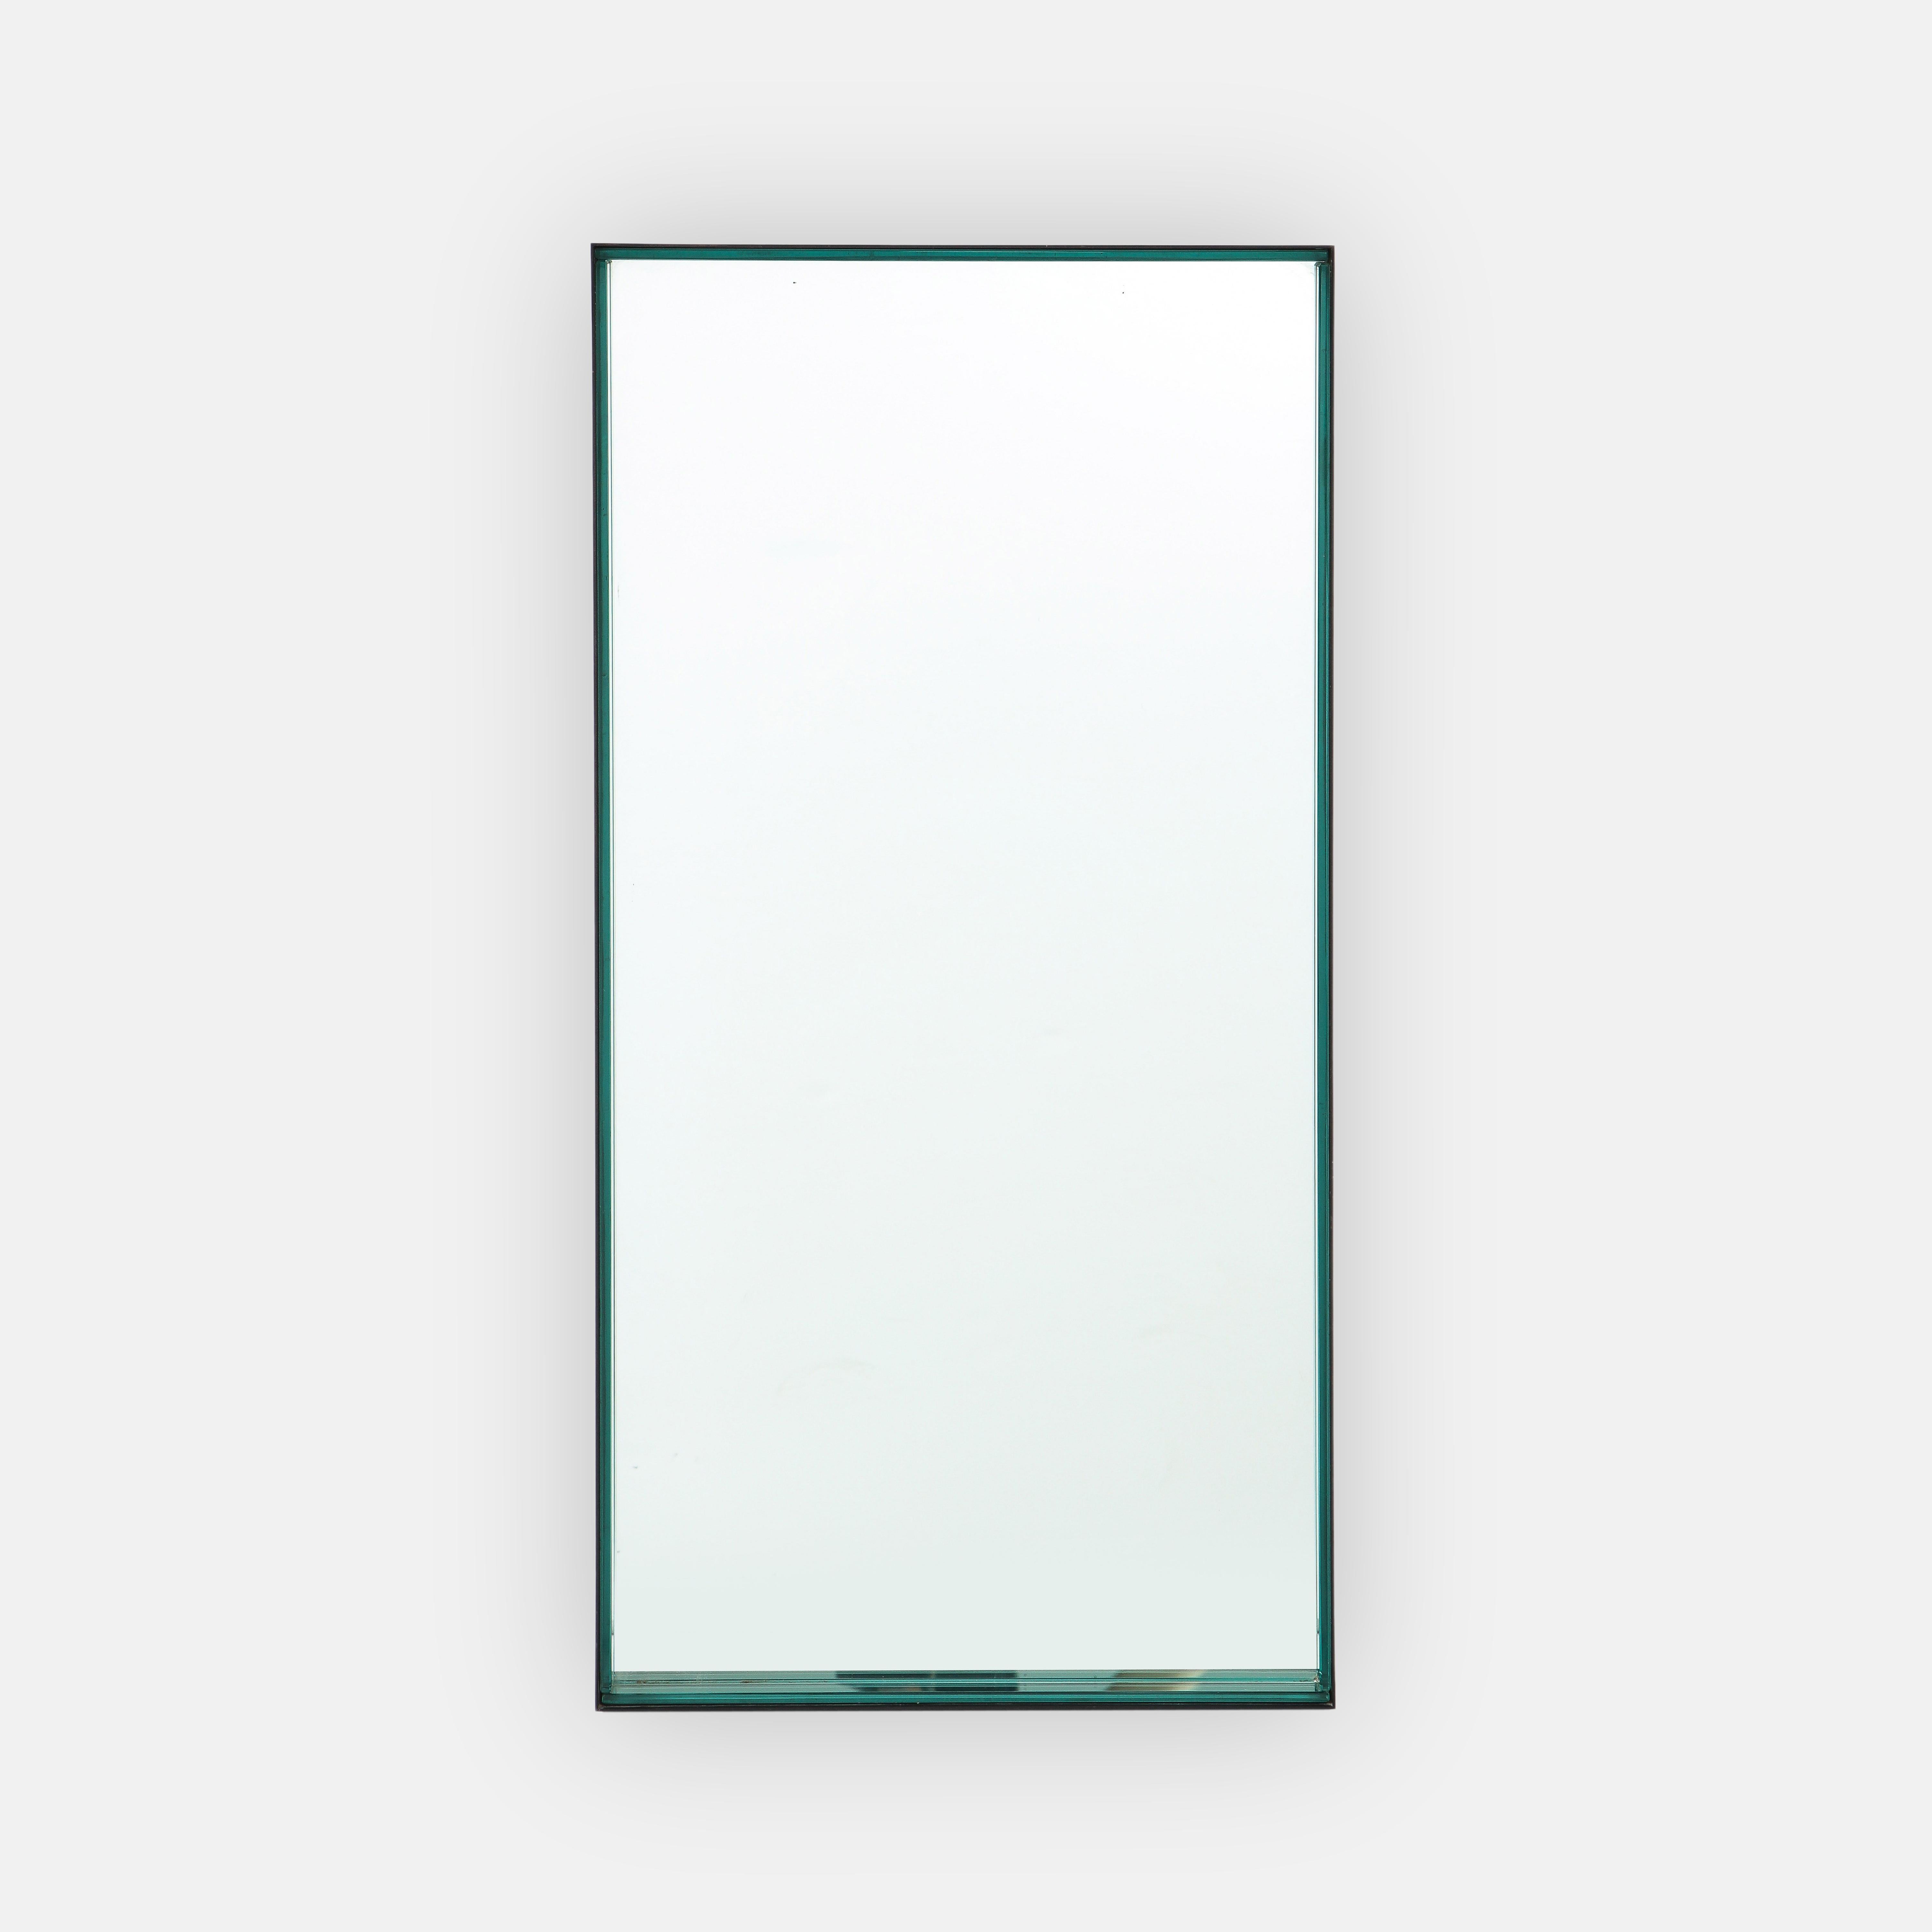 Max Ingrand for Fontana Arte rare rectangular mirror model 1929 with thick strips of green colored glass encased in black enameled metal frame. Balancing a striking contrast of dark metal with exquisite green glass, this modernist mirror exemplifies